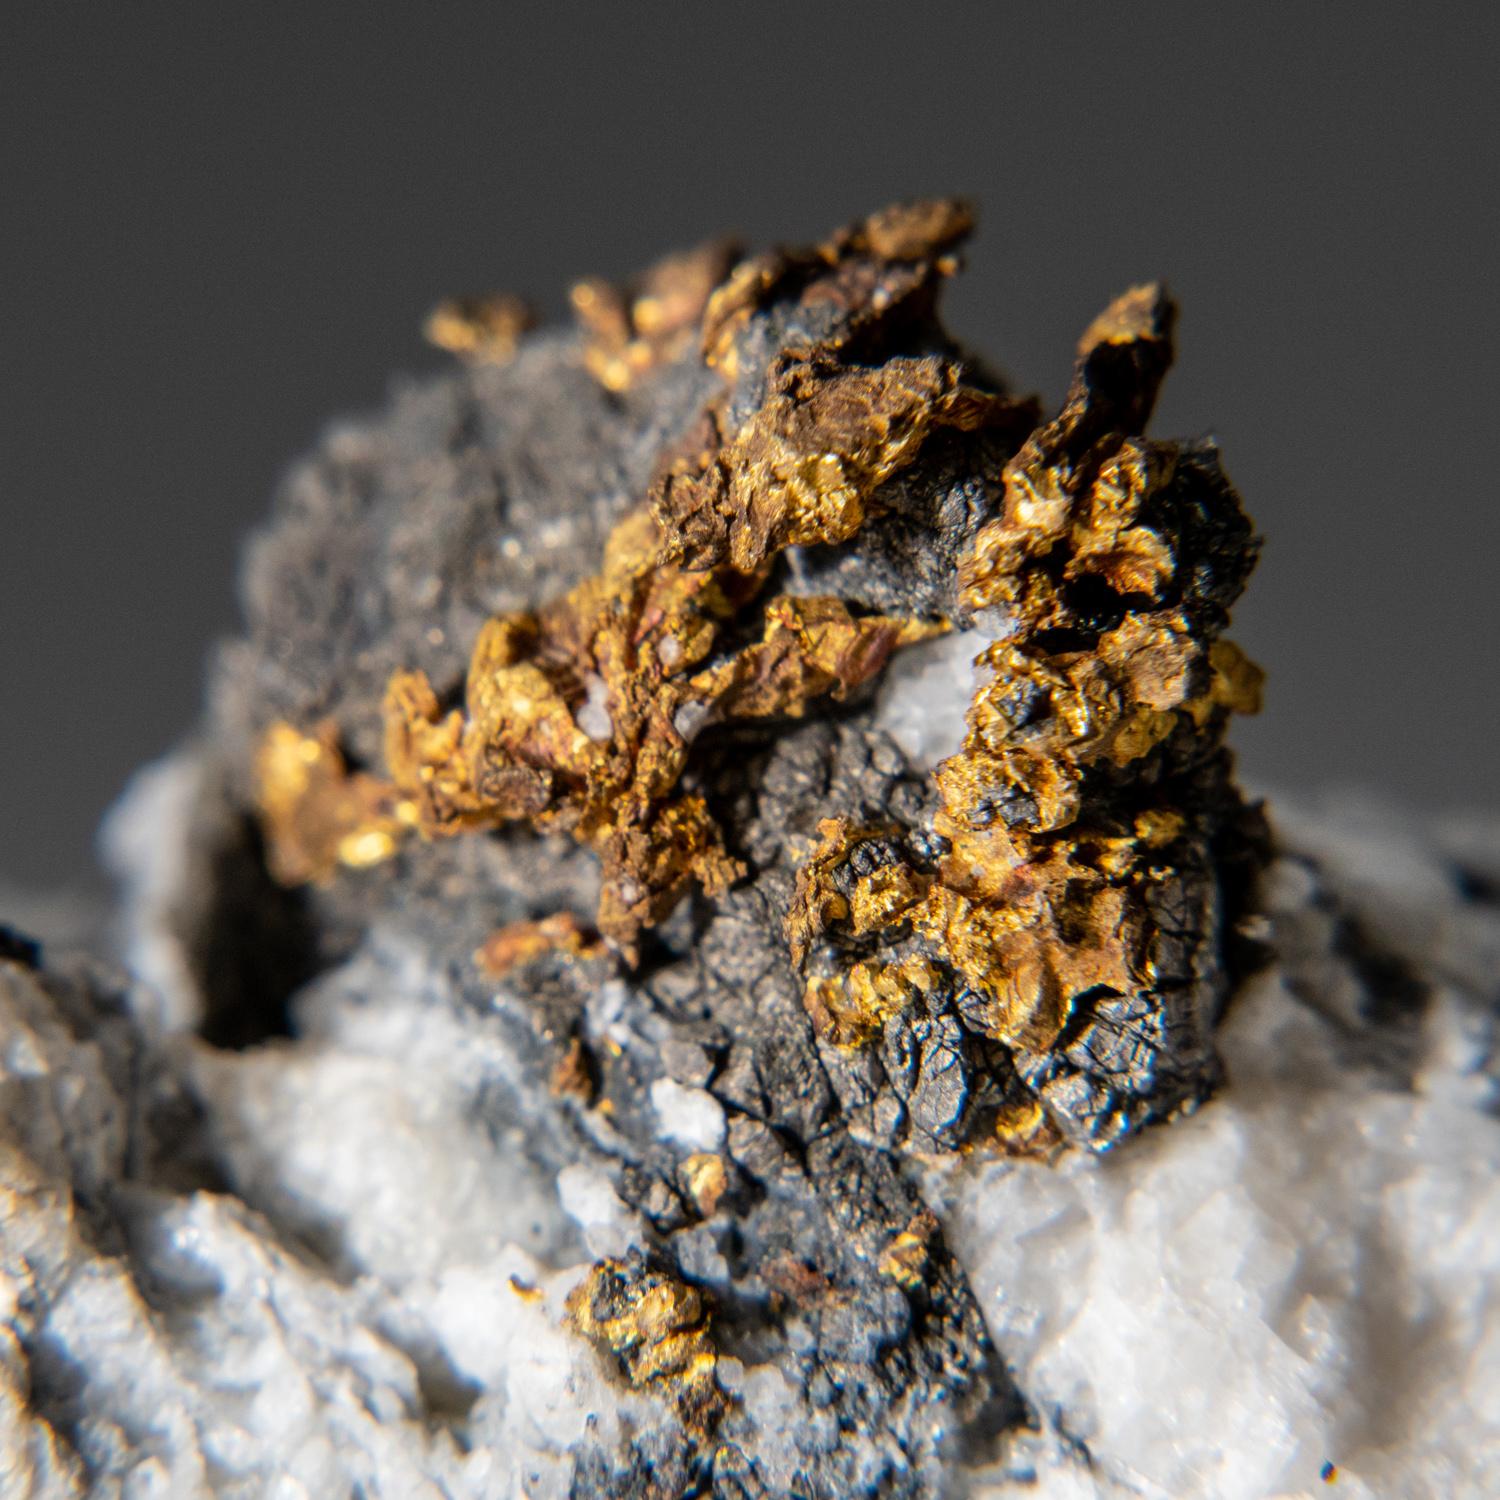 Well crystallized native (natural) gold running throughout arsenapyrite. The gold is perched atop the matrix.

Weight: 98.1 grams, Size: 2.5 x 1 x 1.5 inches